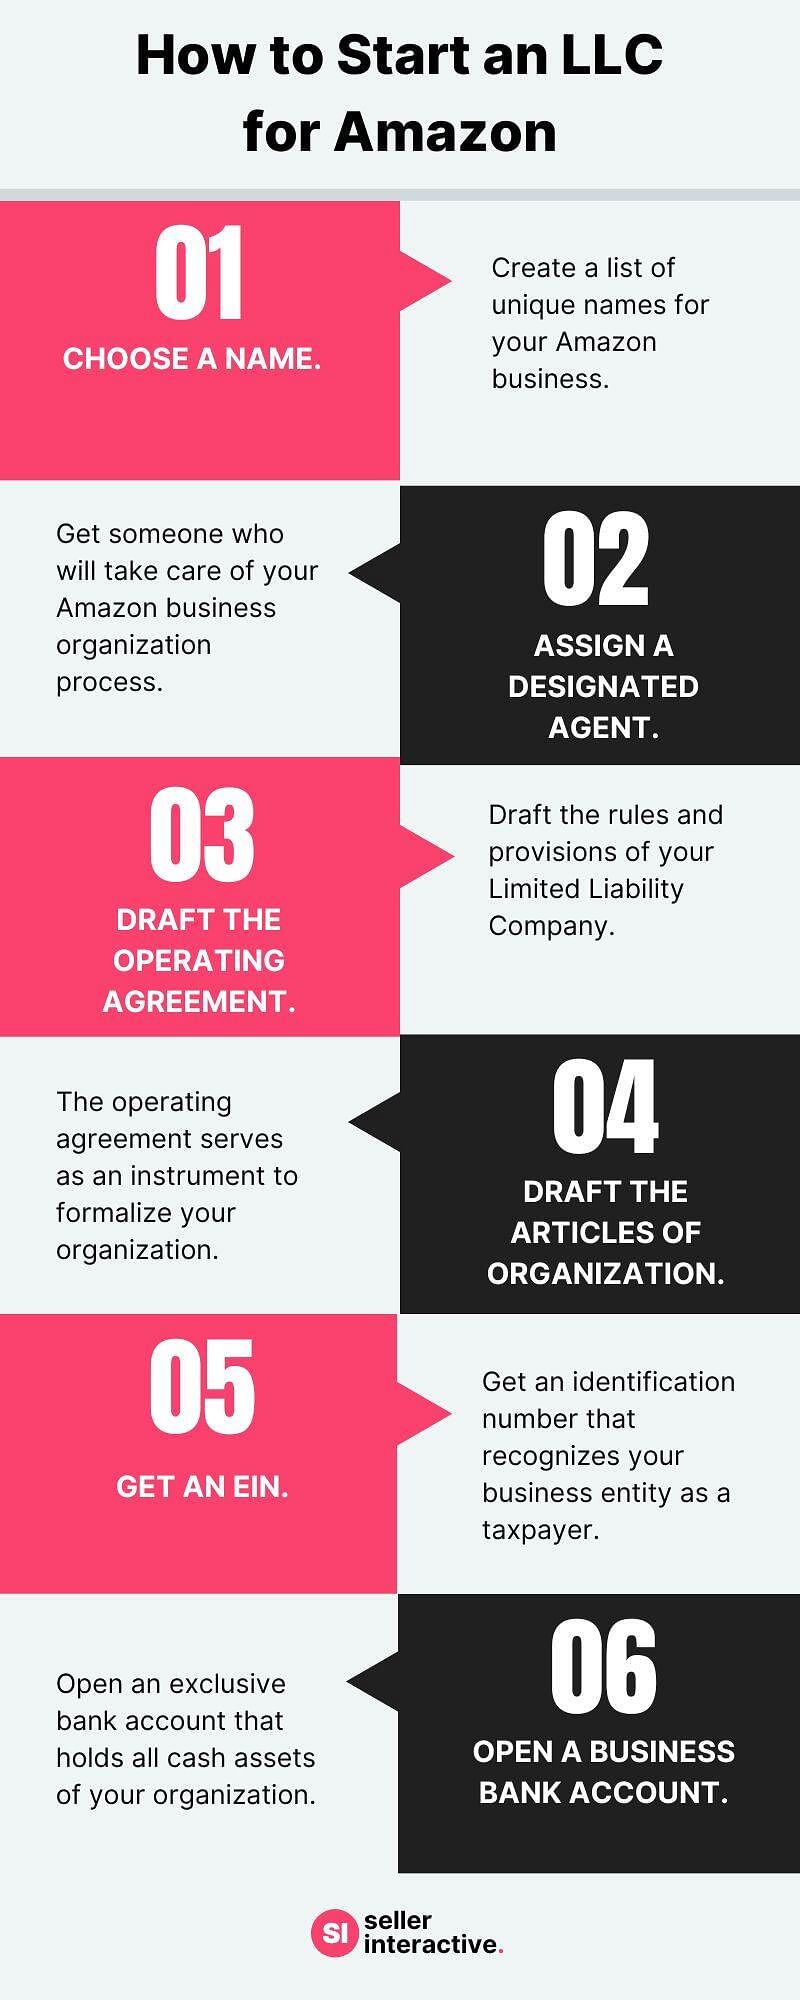 An infographic containing the following: Choose a name, assign a designated agent, draft the operating agreement, draft the articles of organization, get an EIN, open a business bank account.